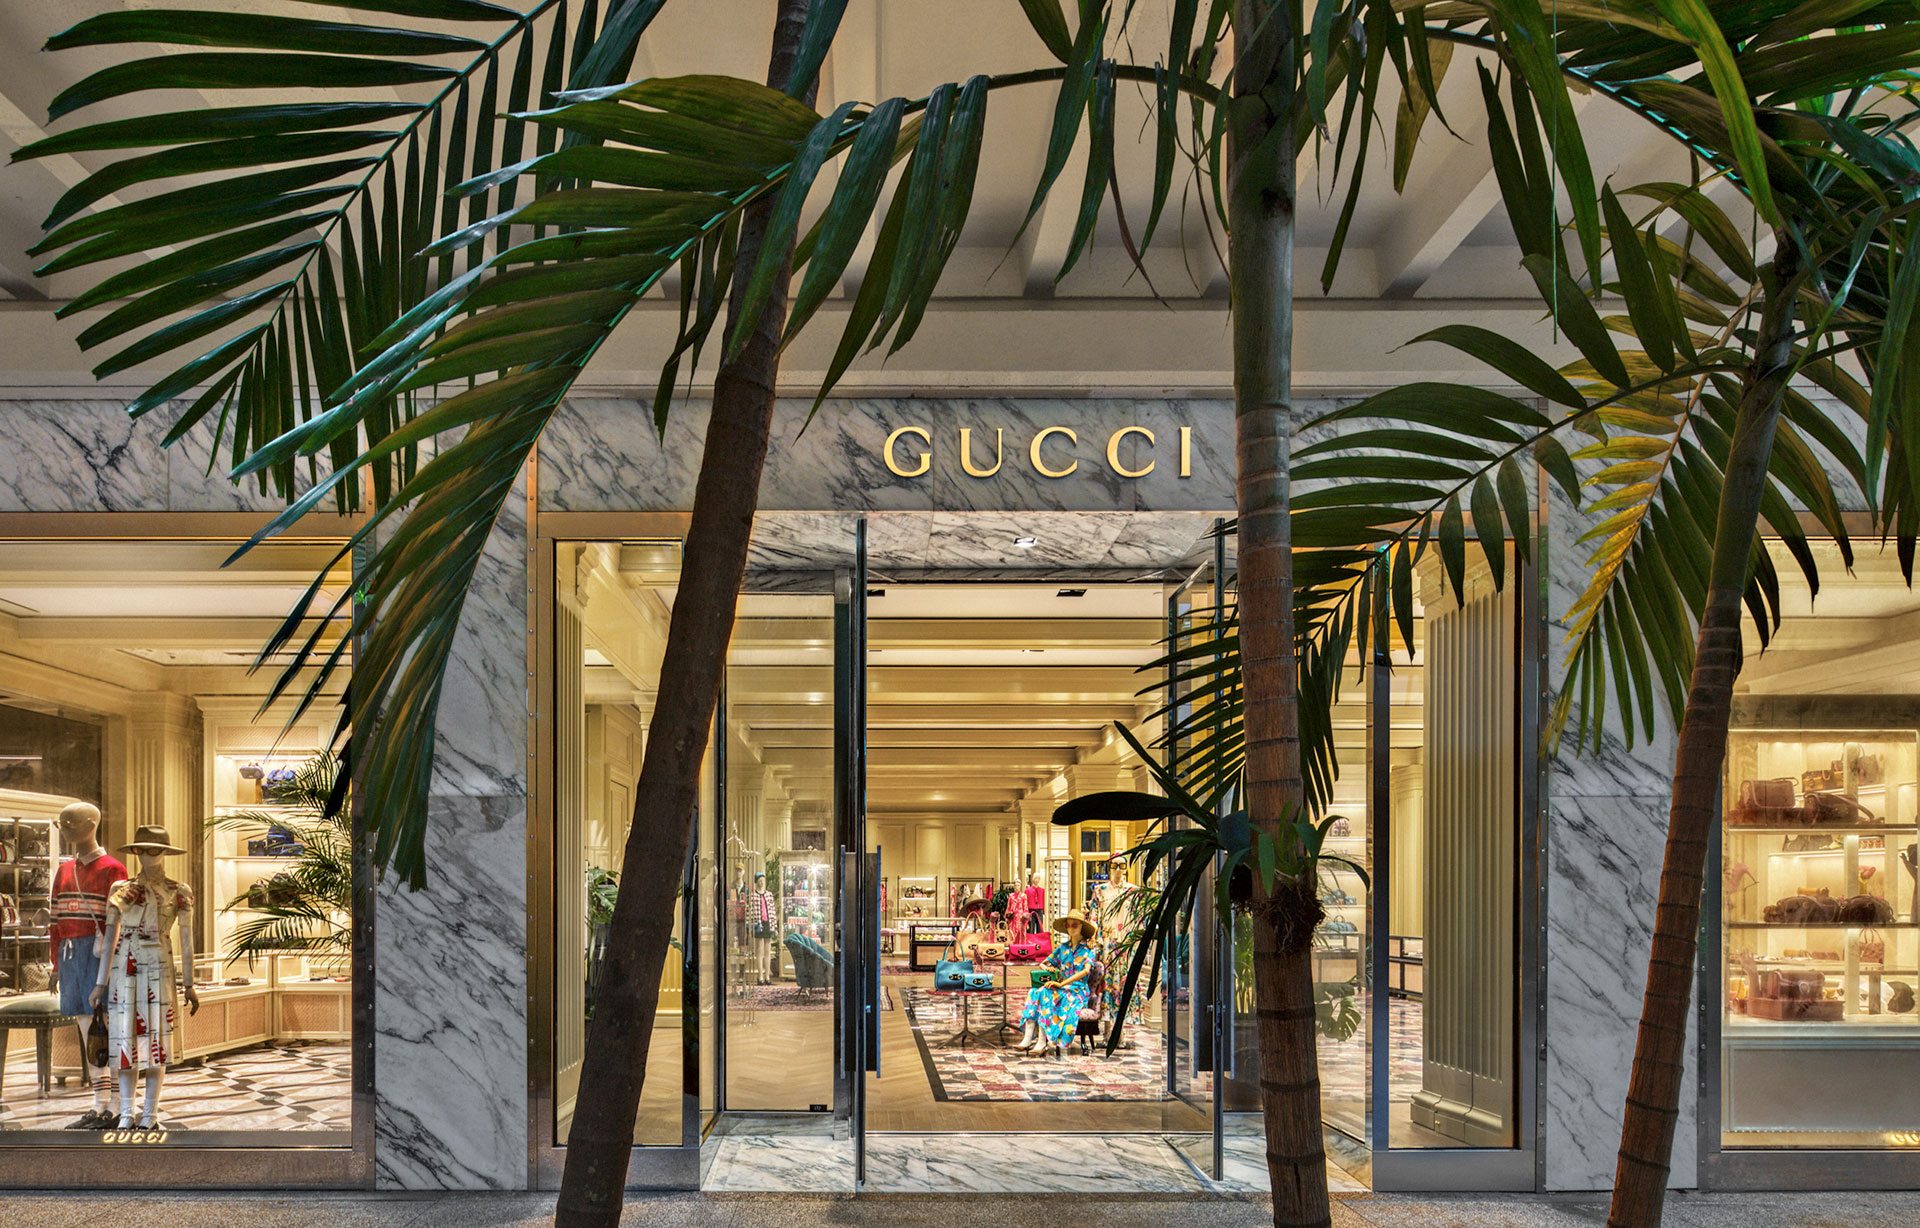 Gucci at Bal Harbour Shops Miami.